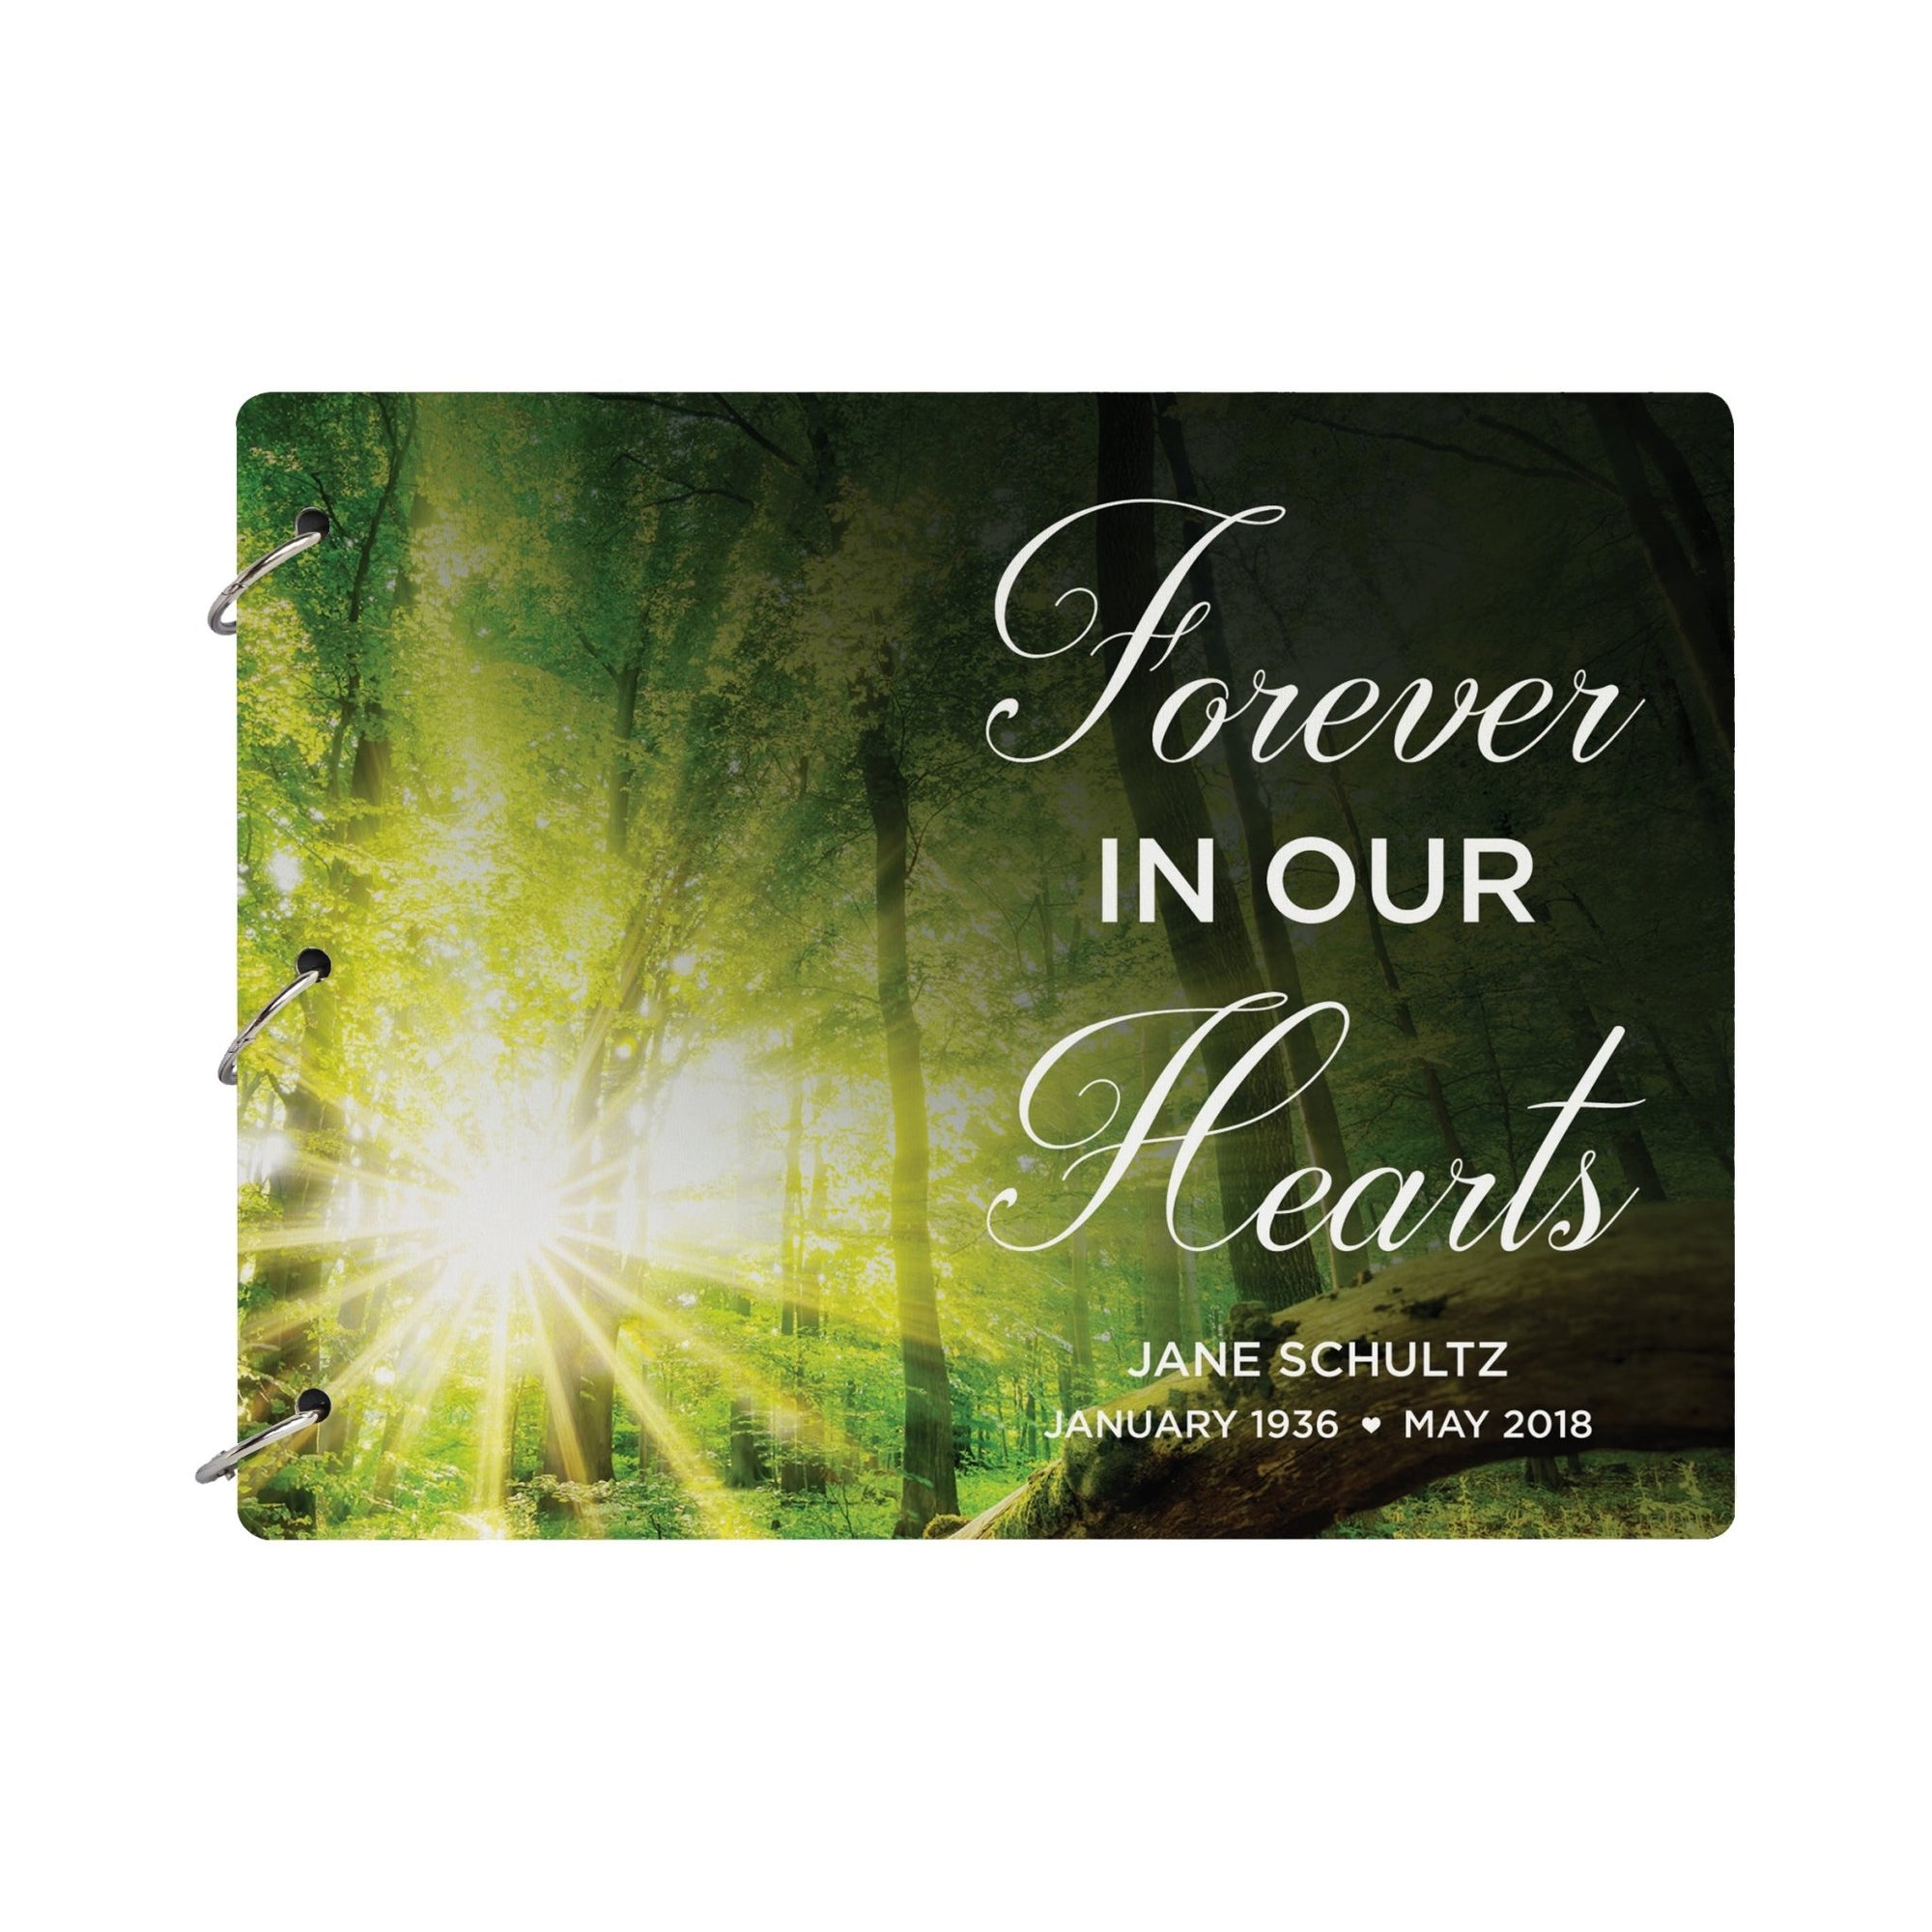 Personalized Celebration Of Life Funeral Guest Books For Memorial Services Registry With Wooden Cover - Forever In Our Hearts - LifeSong Milestones